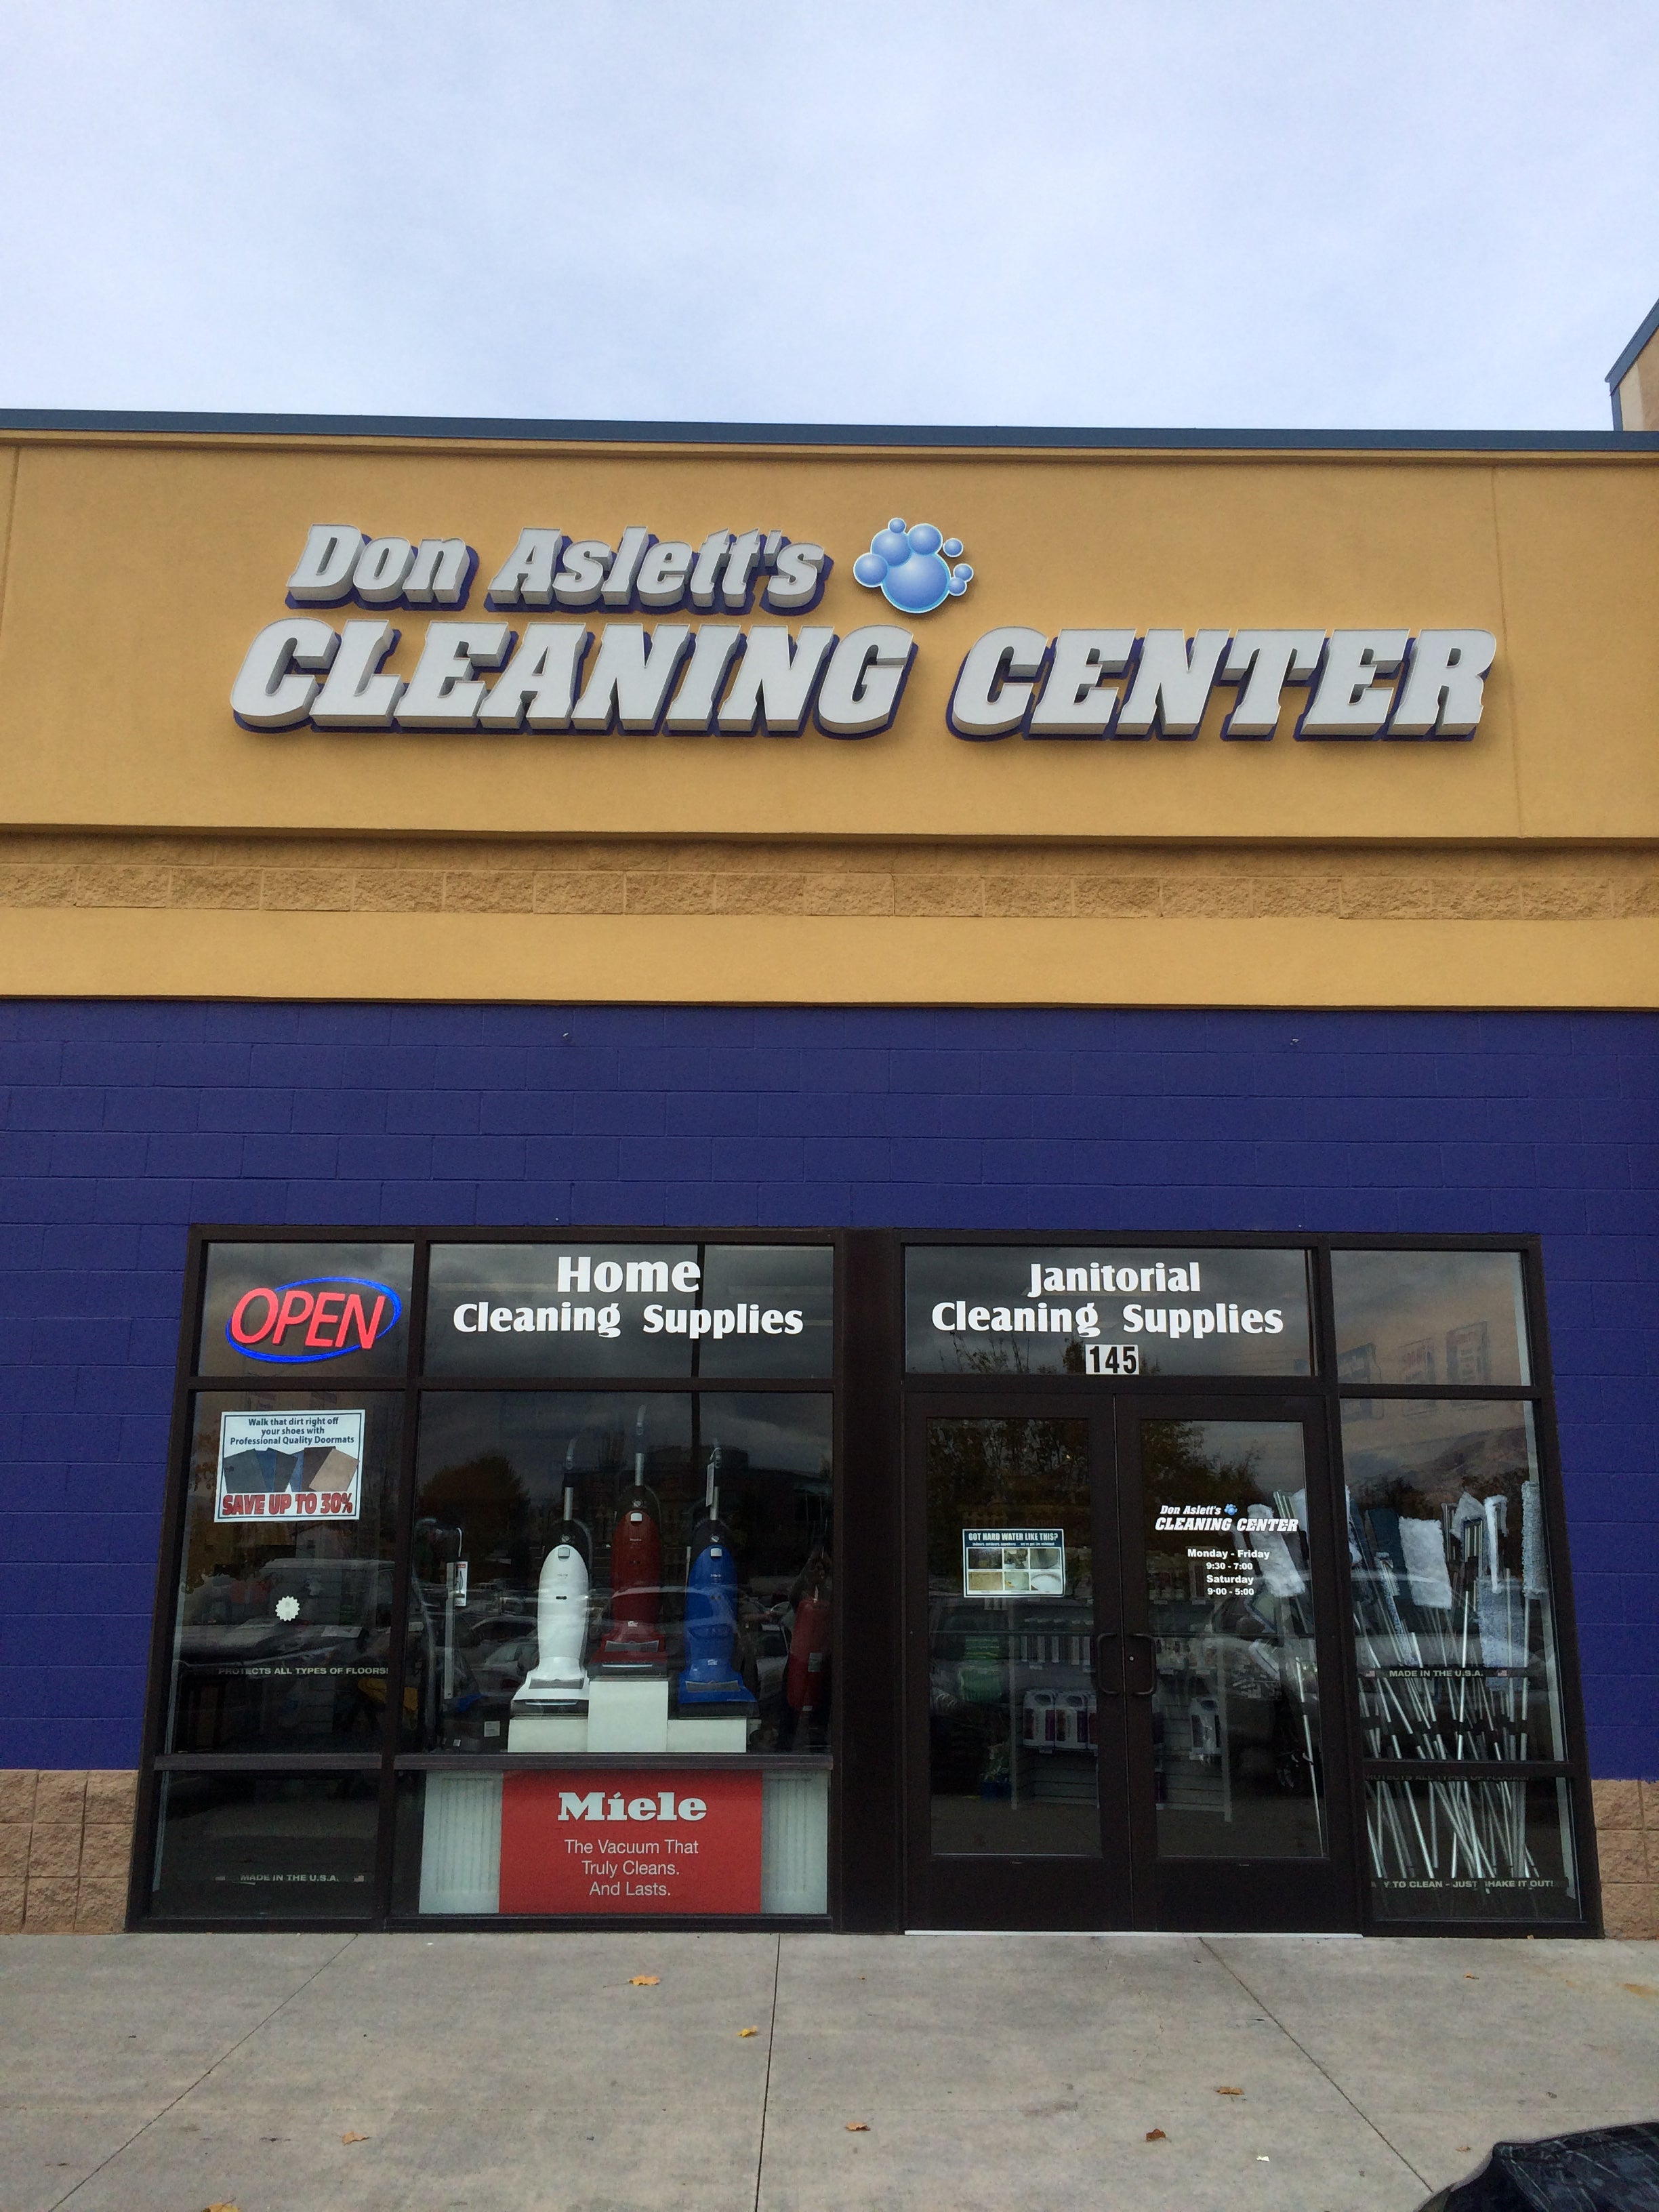 About Us - Don Aslett's Cleaning Stores